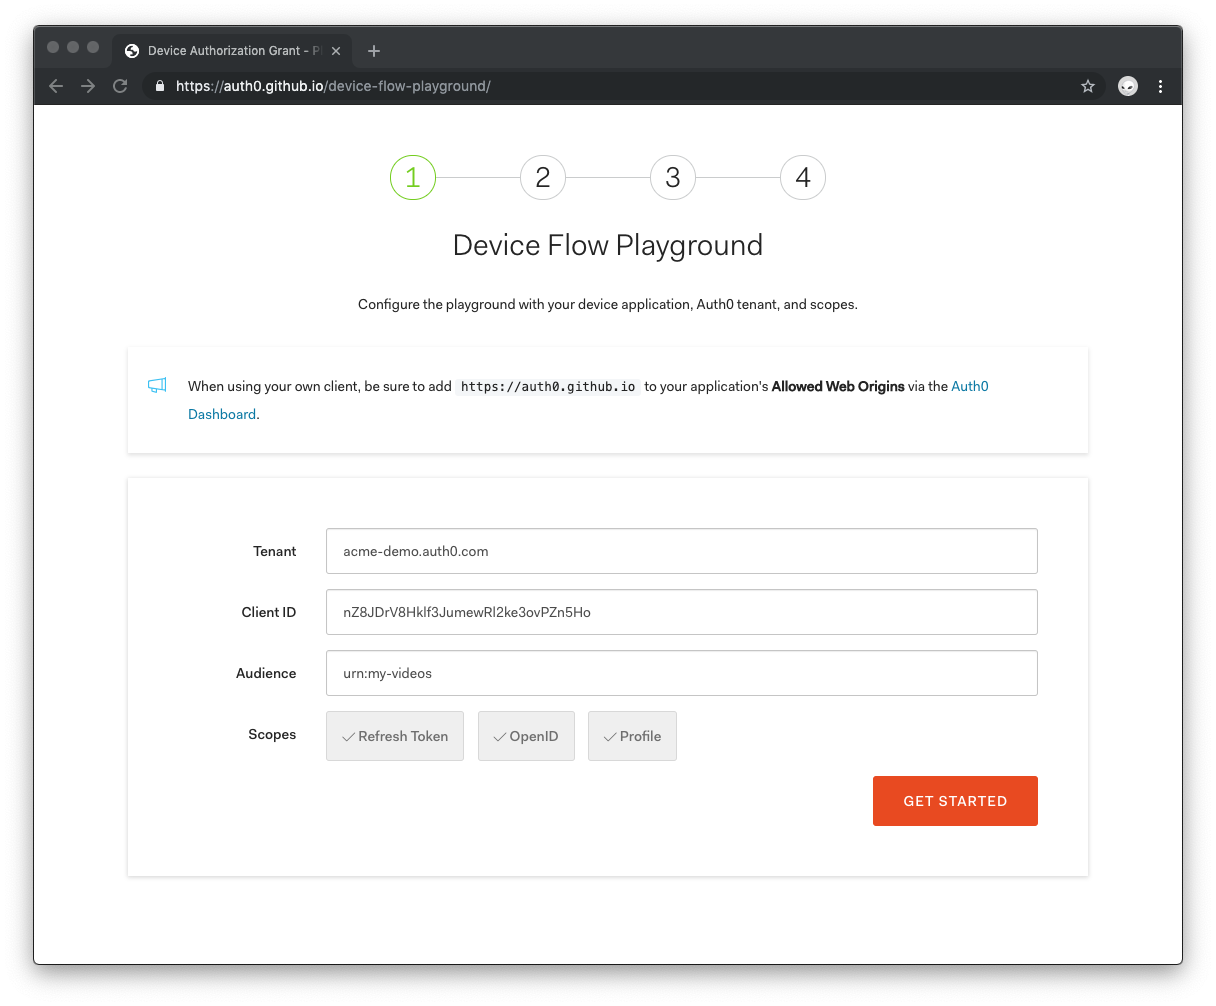 Image showing dashboard for how to get started with Auth0 Device Flow